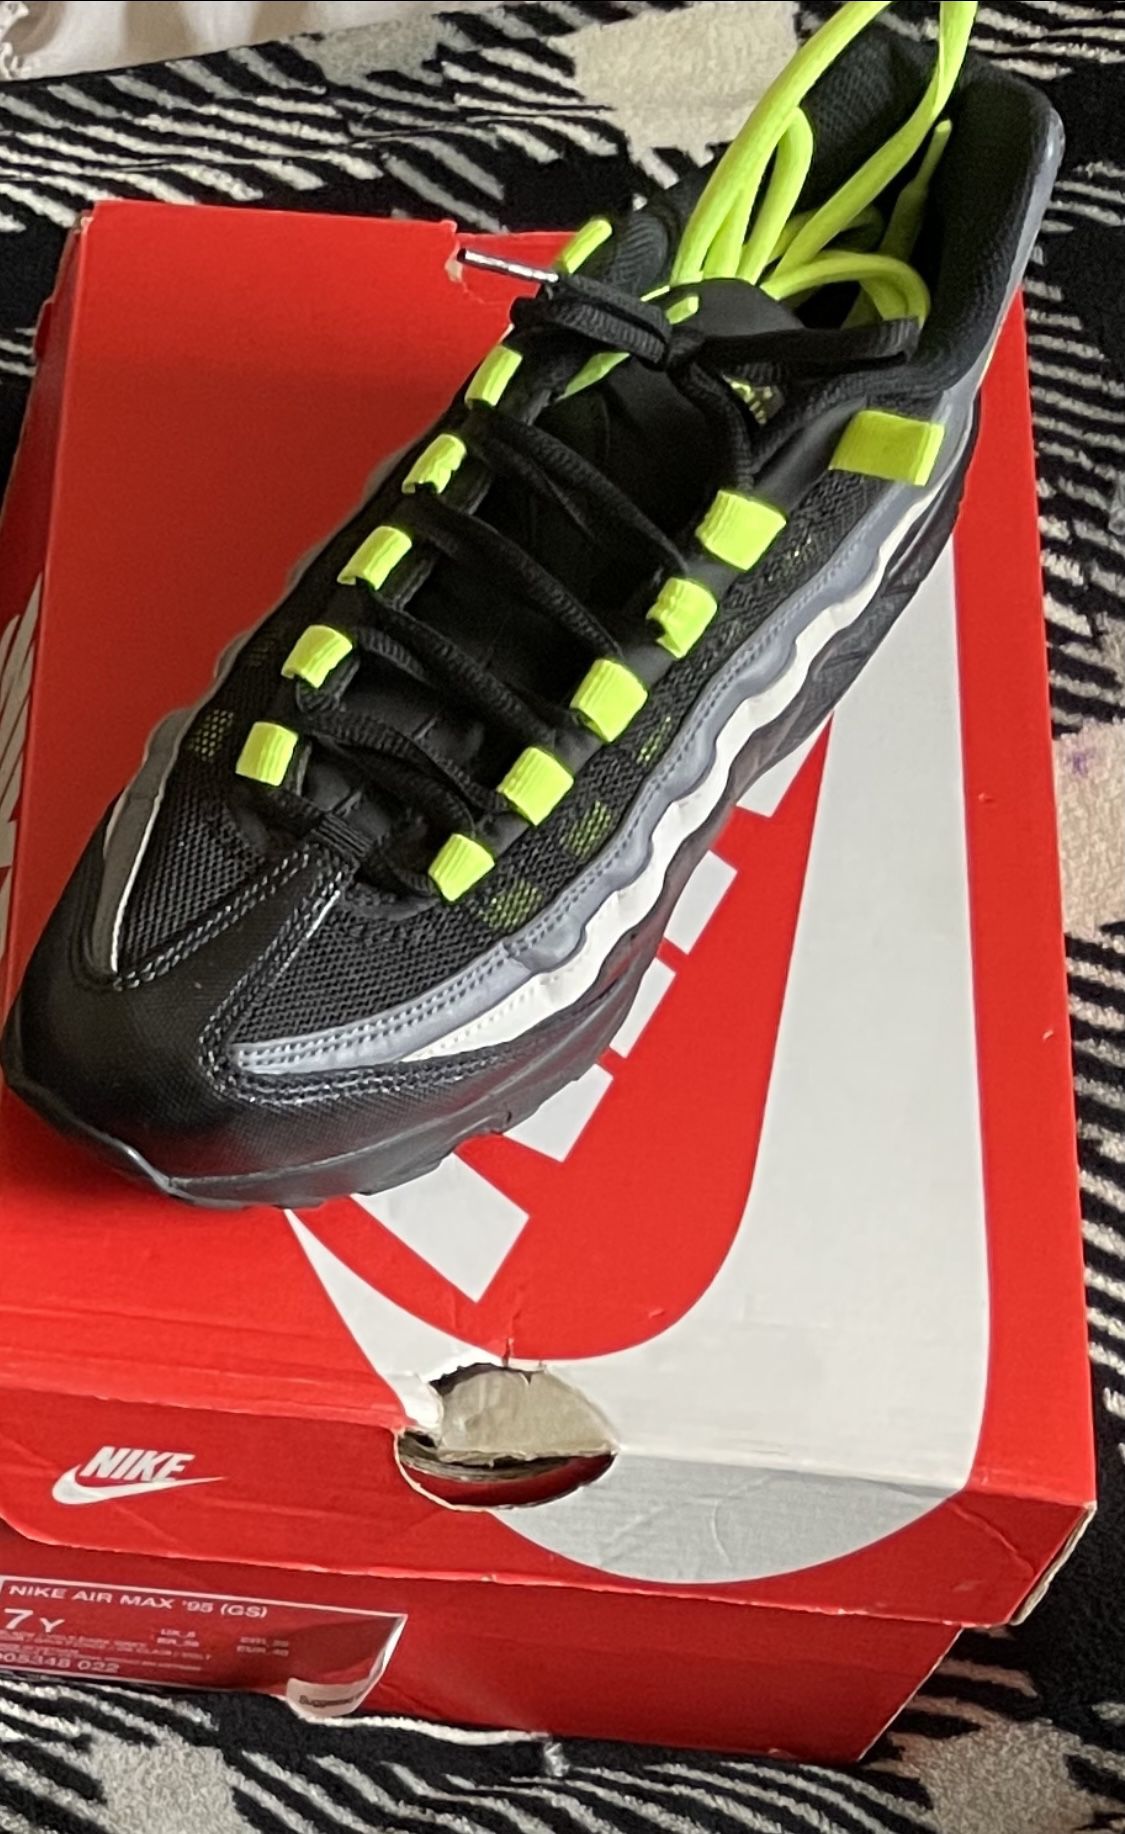 Nike Men's Air Max 95 Shoes in Black, Size: 8.5 | DM0011-009